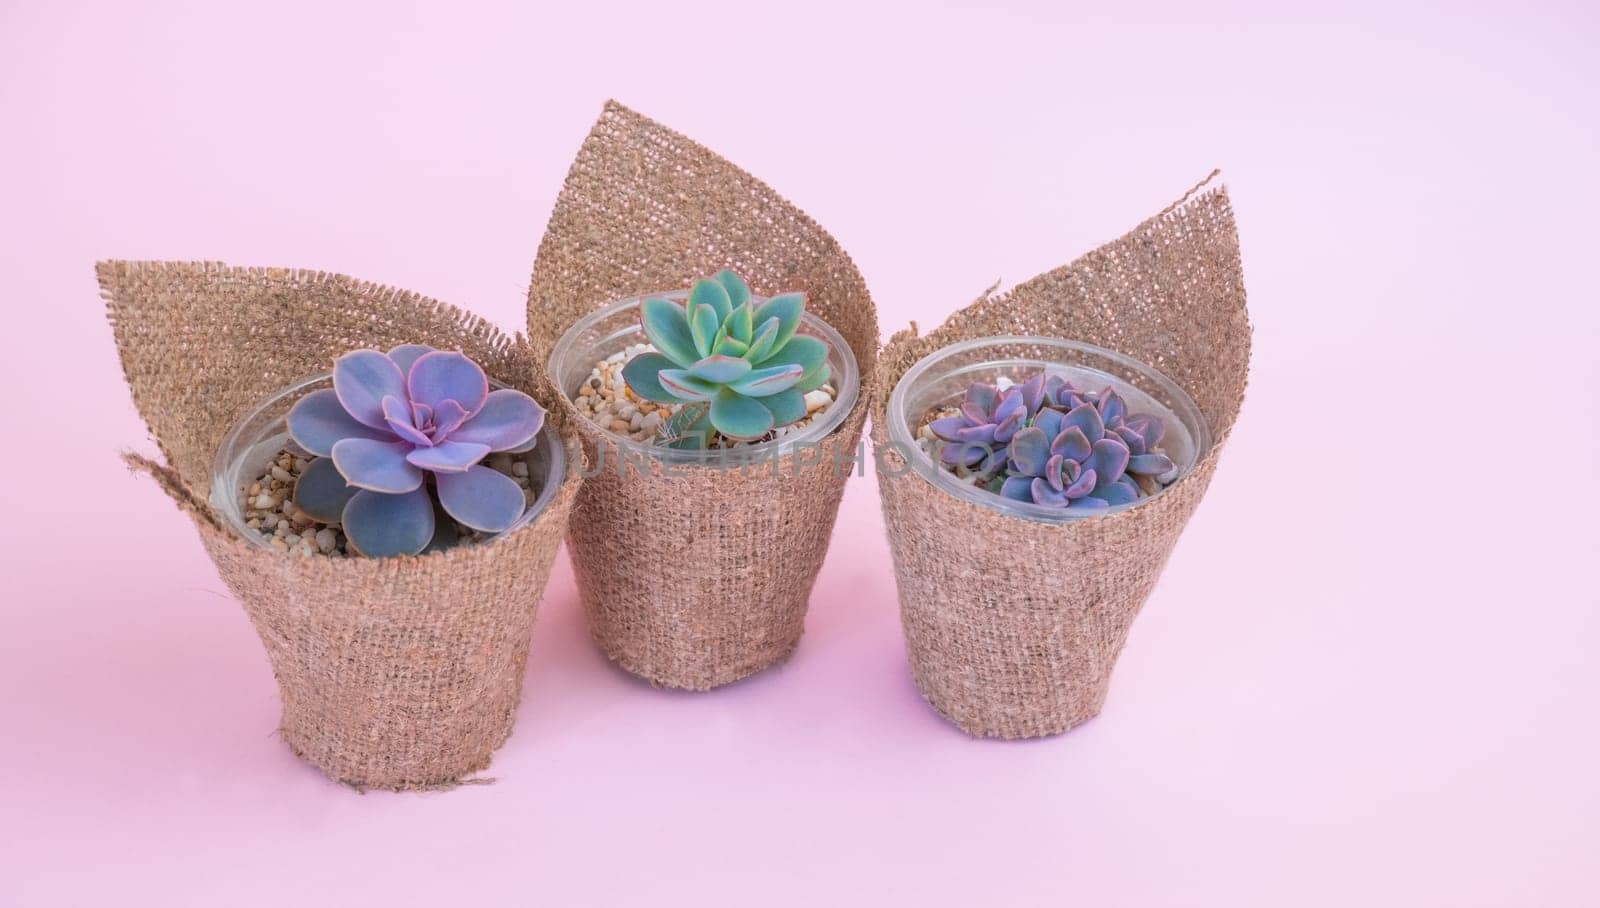 Three small pots wrapped in burlap with succulent flowers on a pink pastel background by Ekaterina34